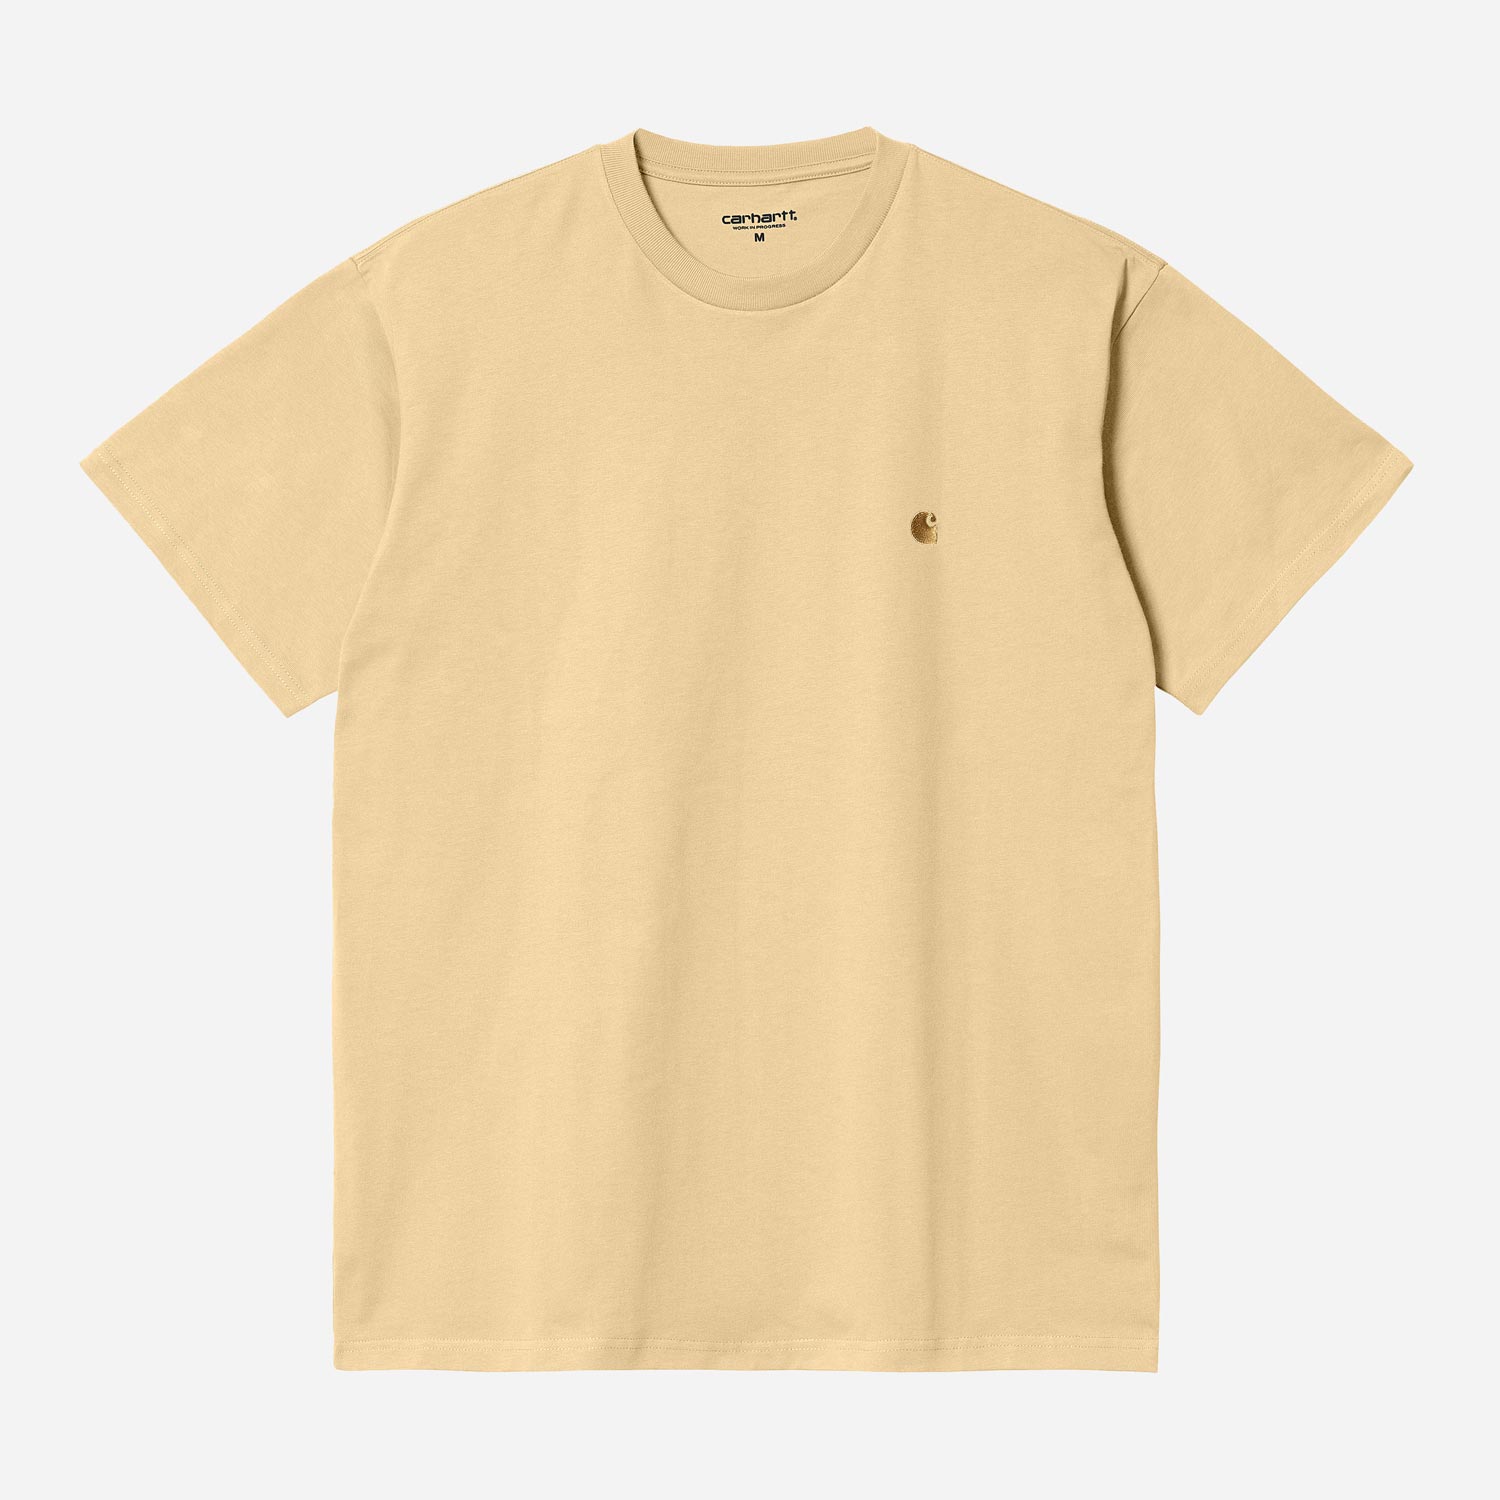 Carhartt WIP Chase Tee - Citron/Gold